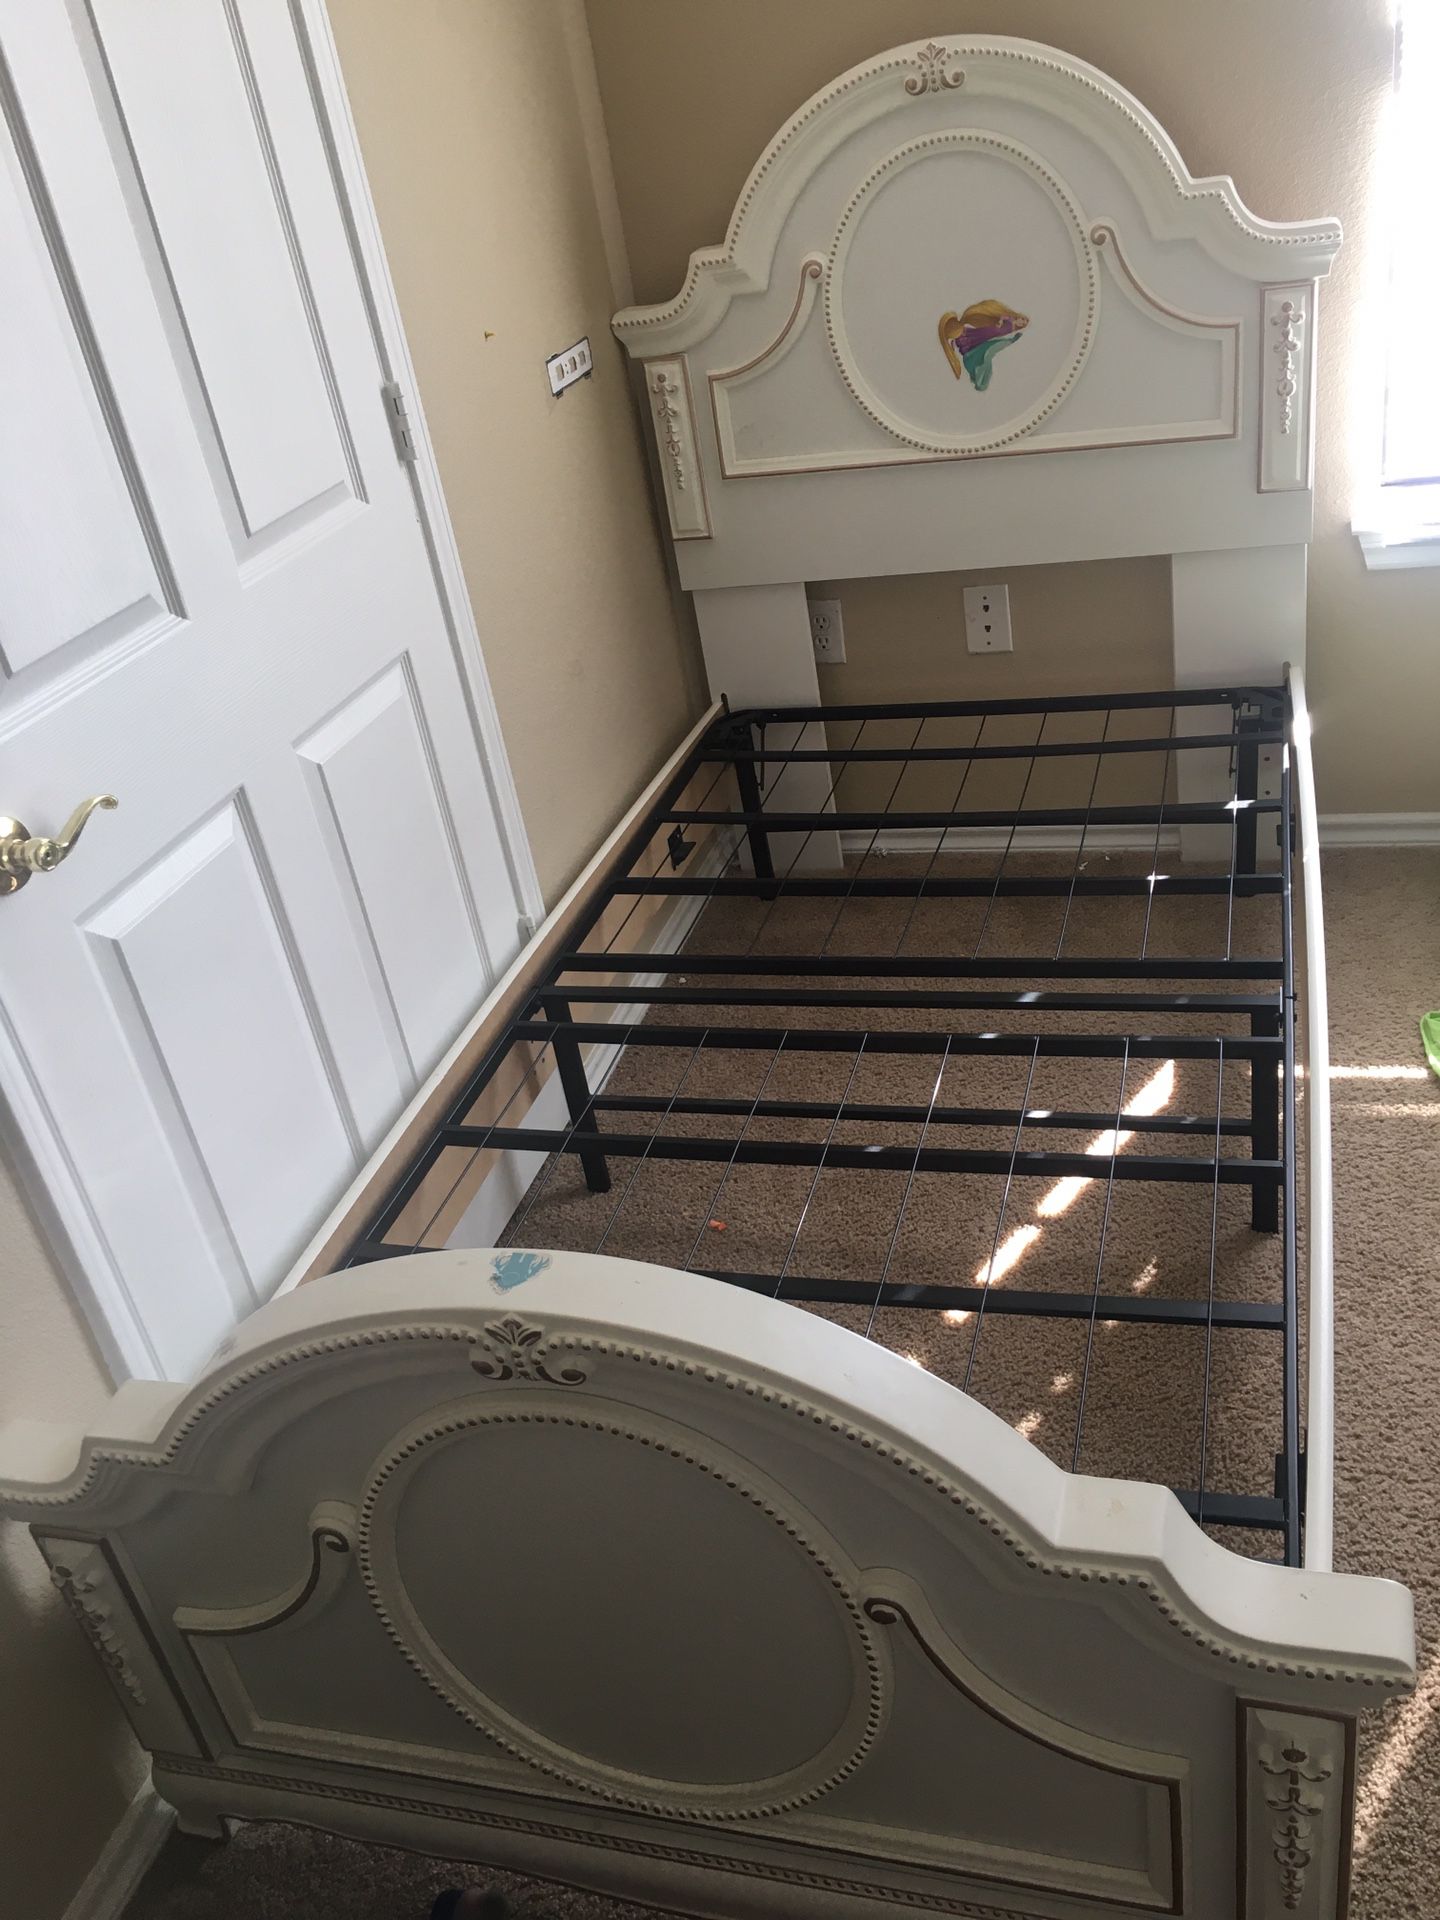 Twin size bed frame best quality perfect condition